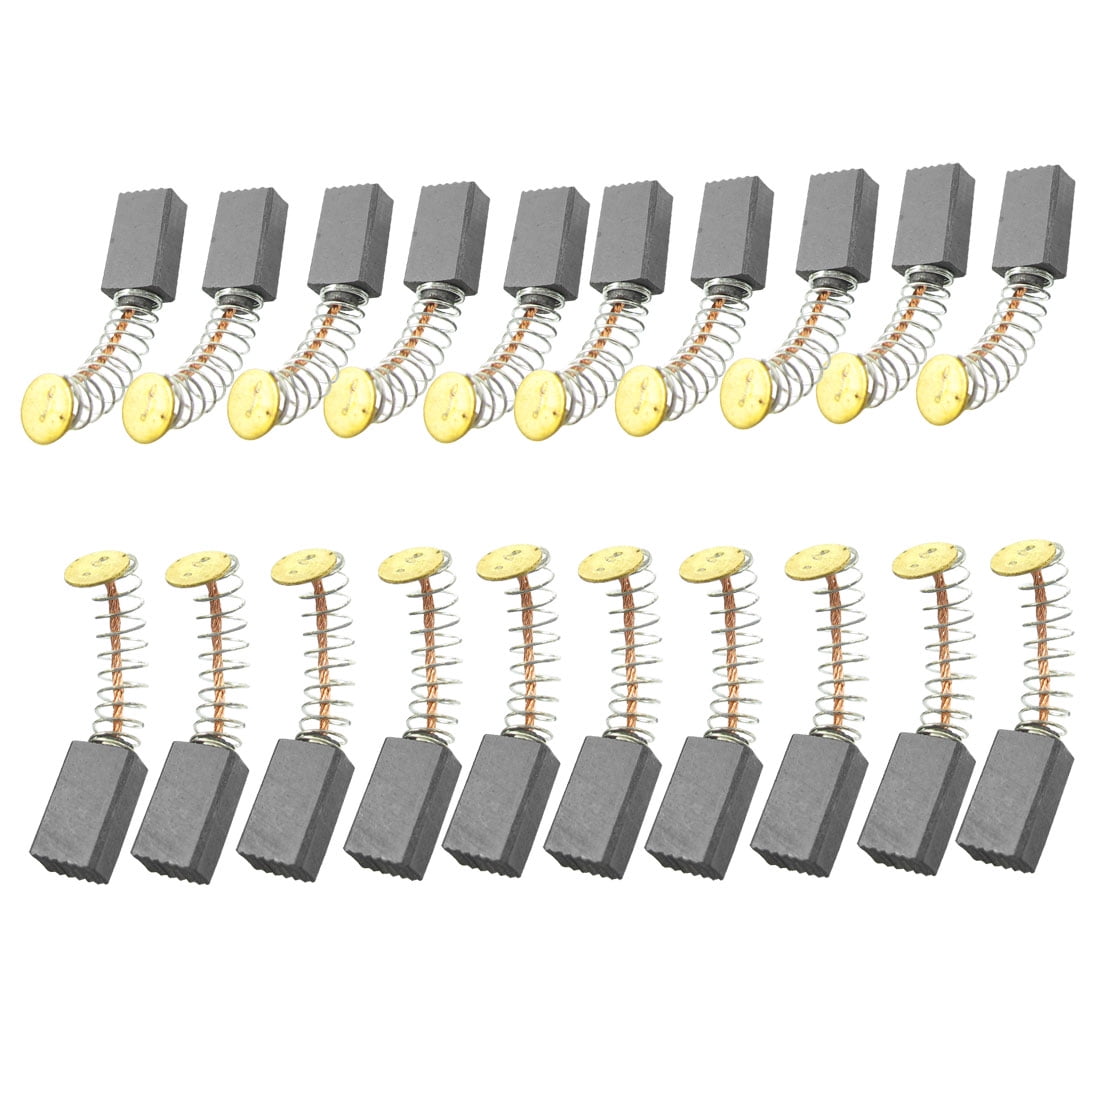 10Pairs Electric Motor Carbon Brushes para sa Grinder 14mm x 8mm x 6mm 